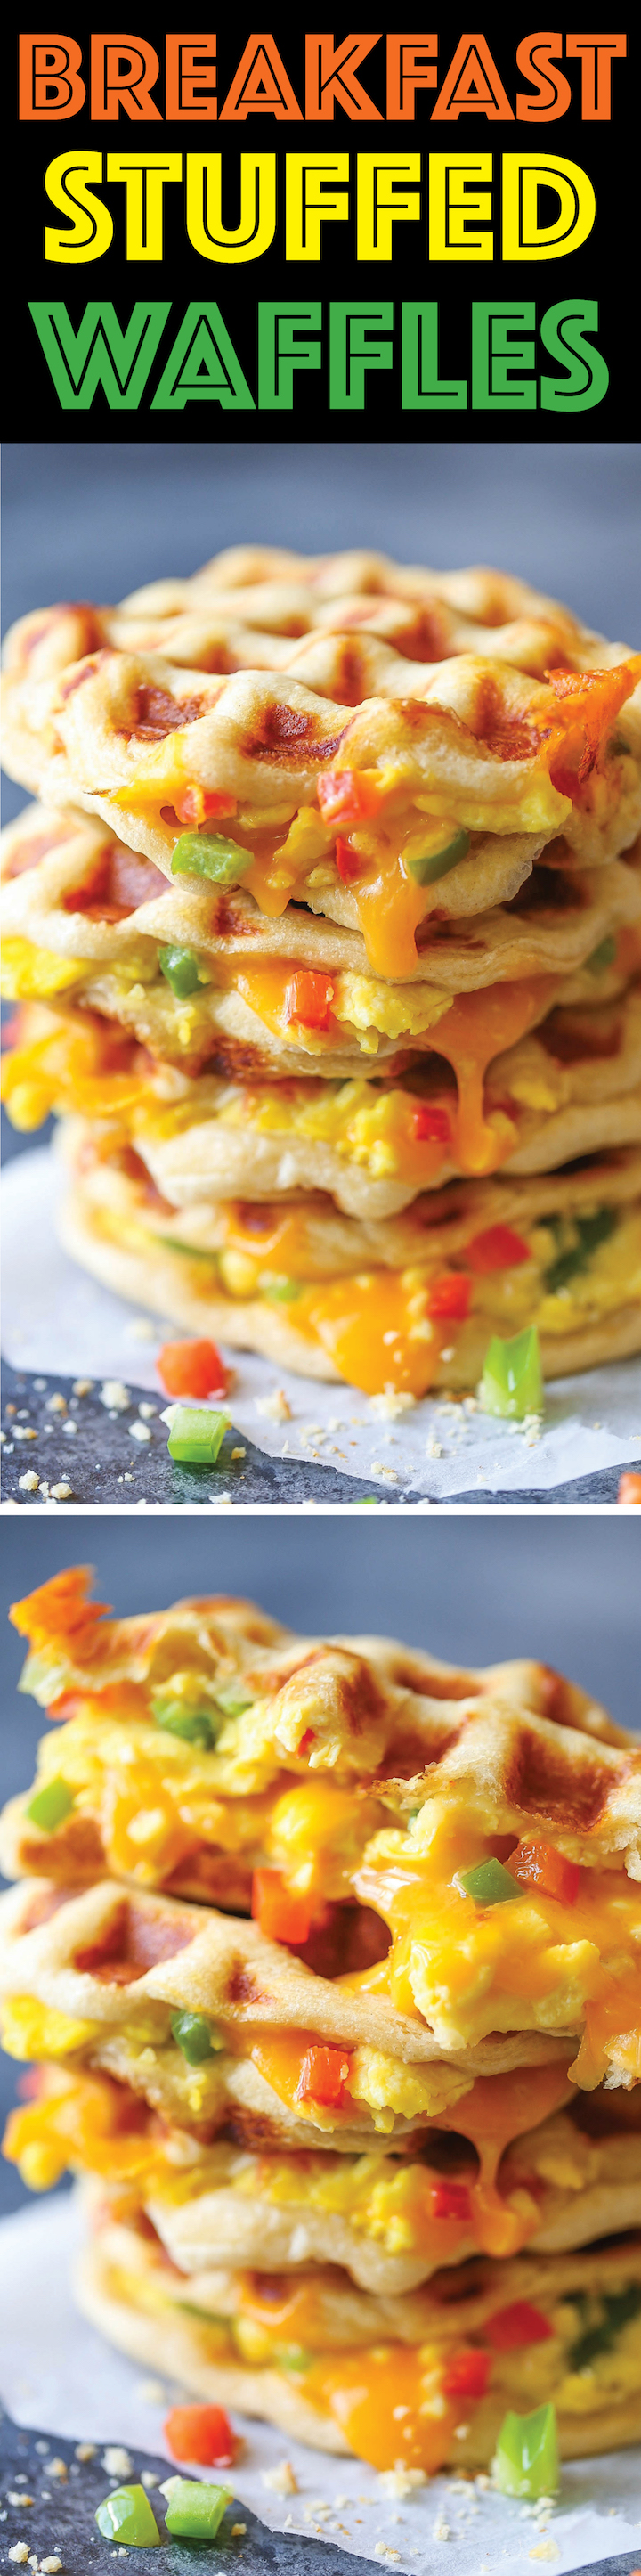 Breakfast Stuffed Waffles - The most epic YET EASIEST portable breakfast. Biscuit dough is transformed into waffles, stuffed with cheesy scrambled eggs!